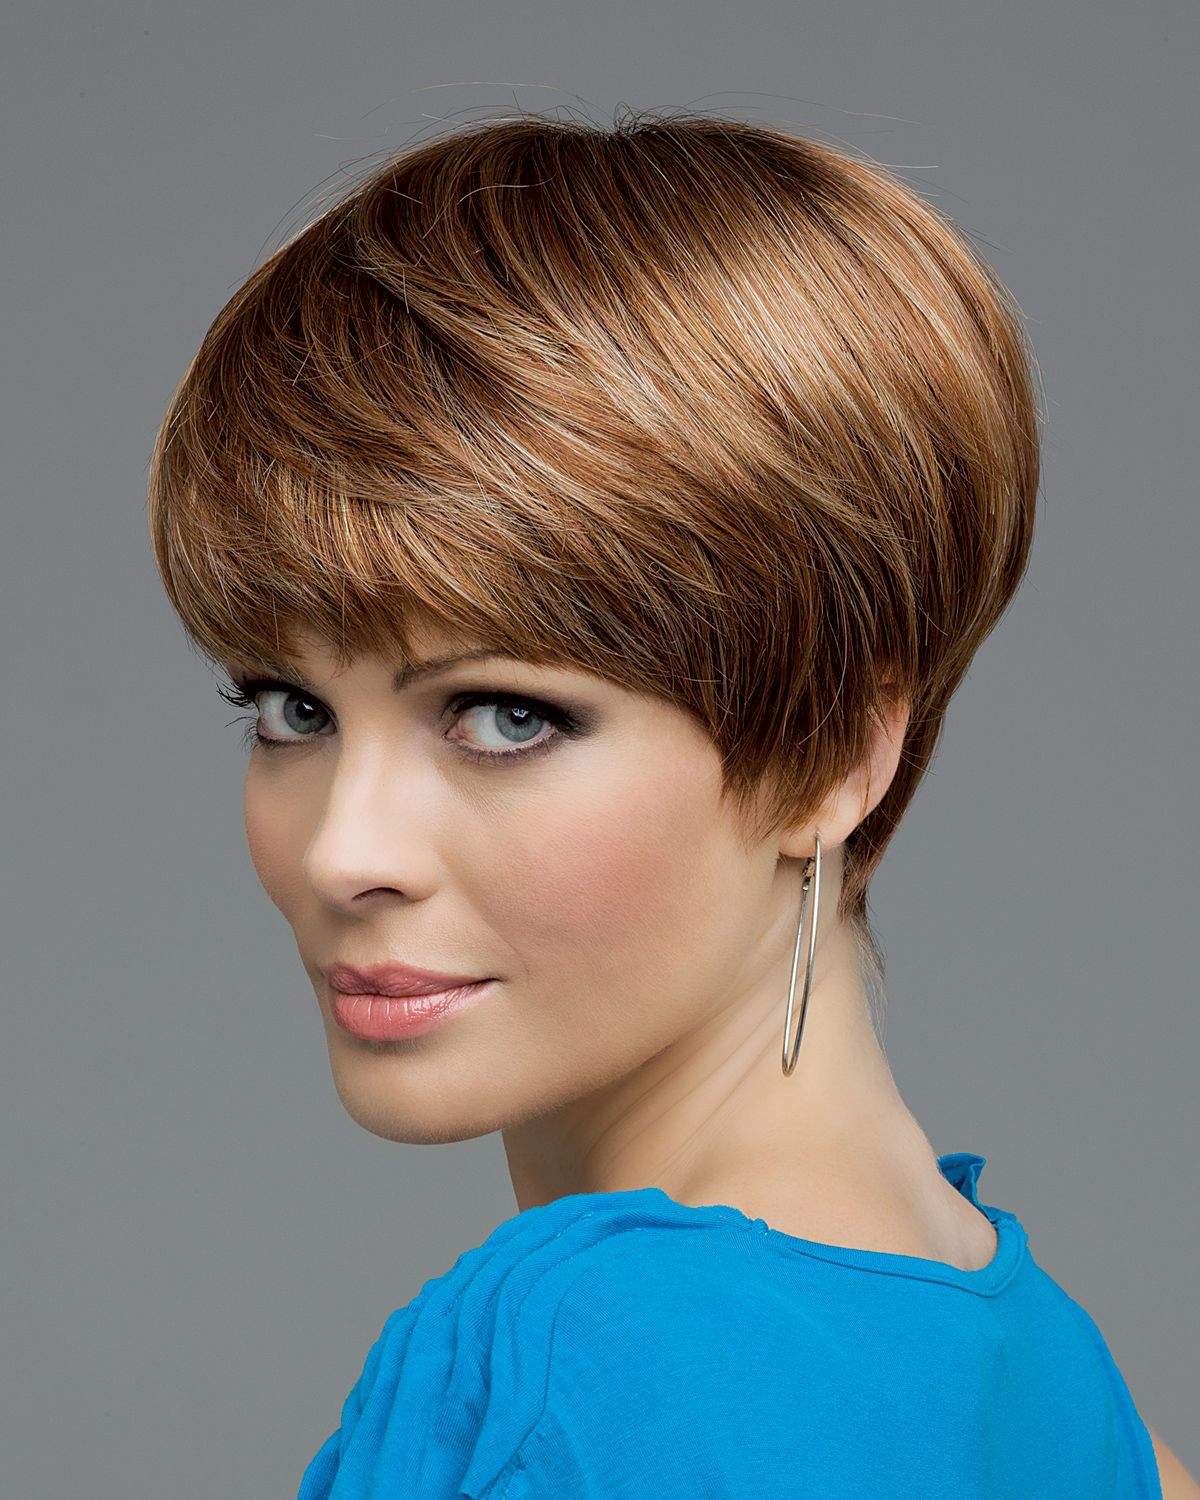 New high quality synthetic wigs at a low price